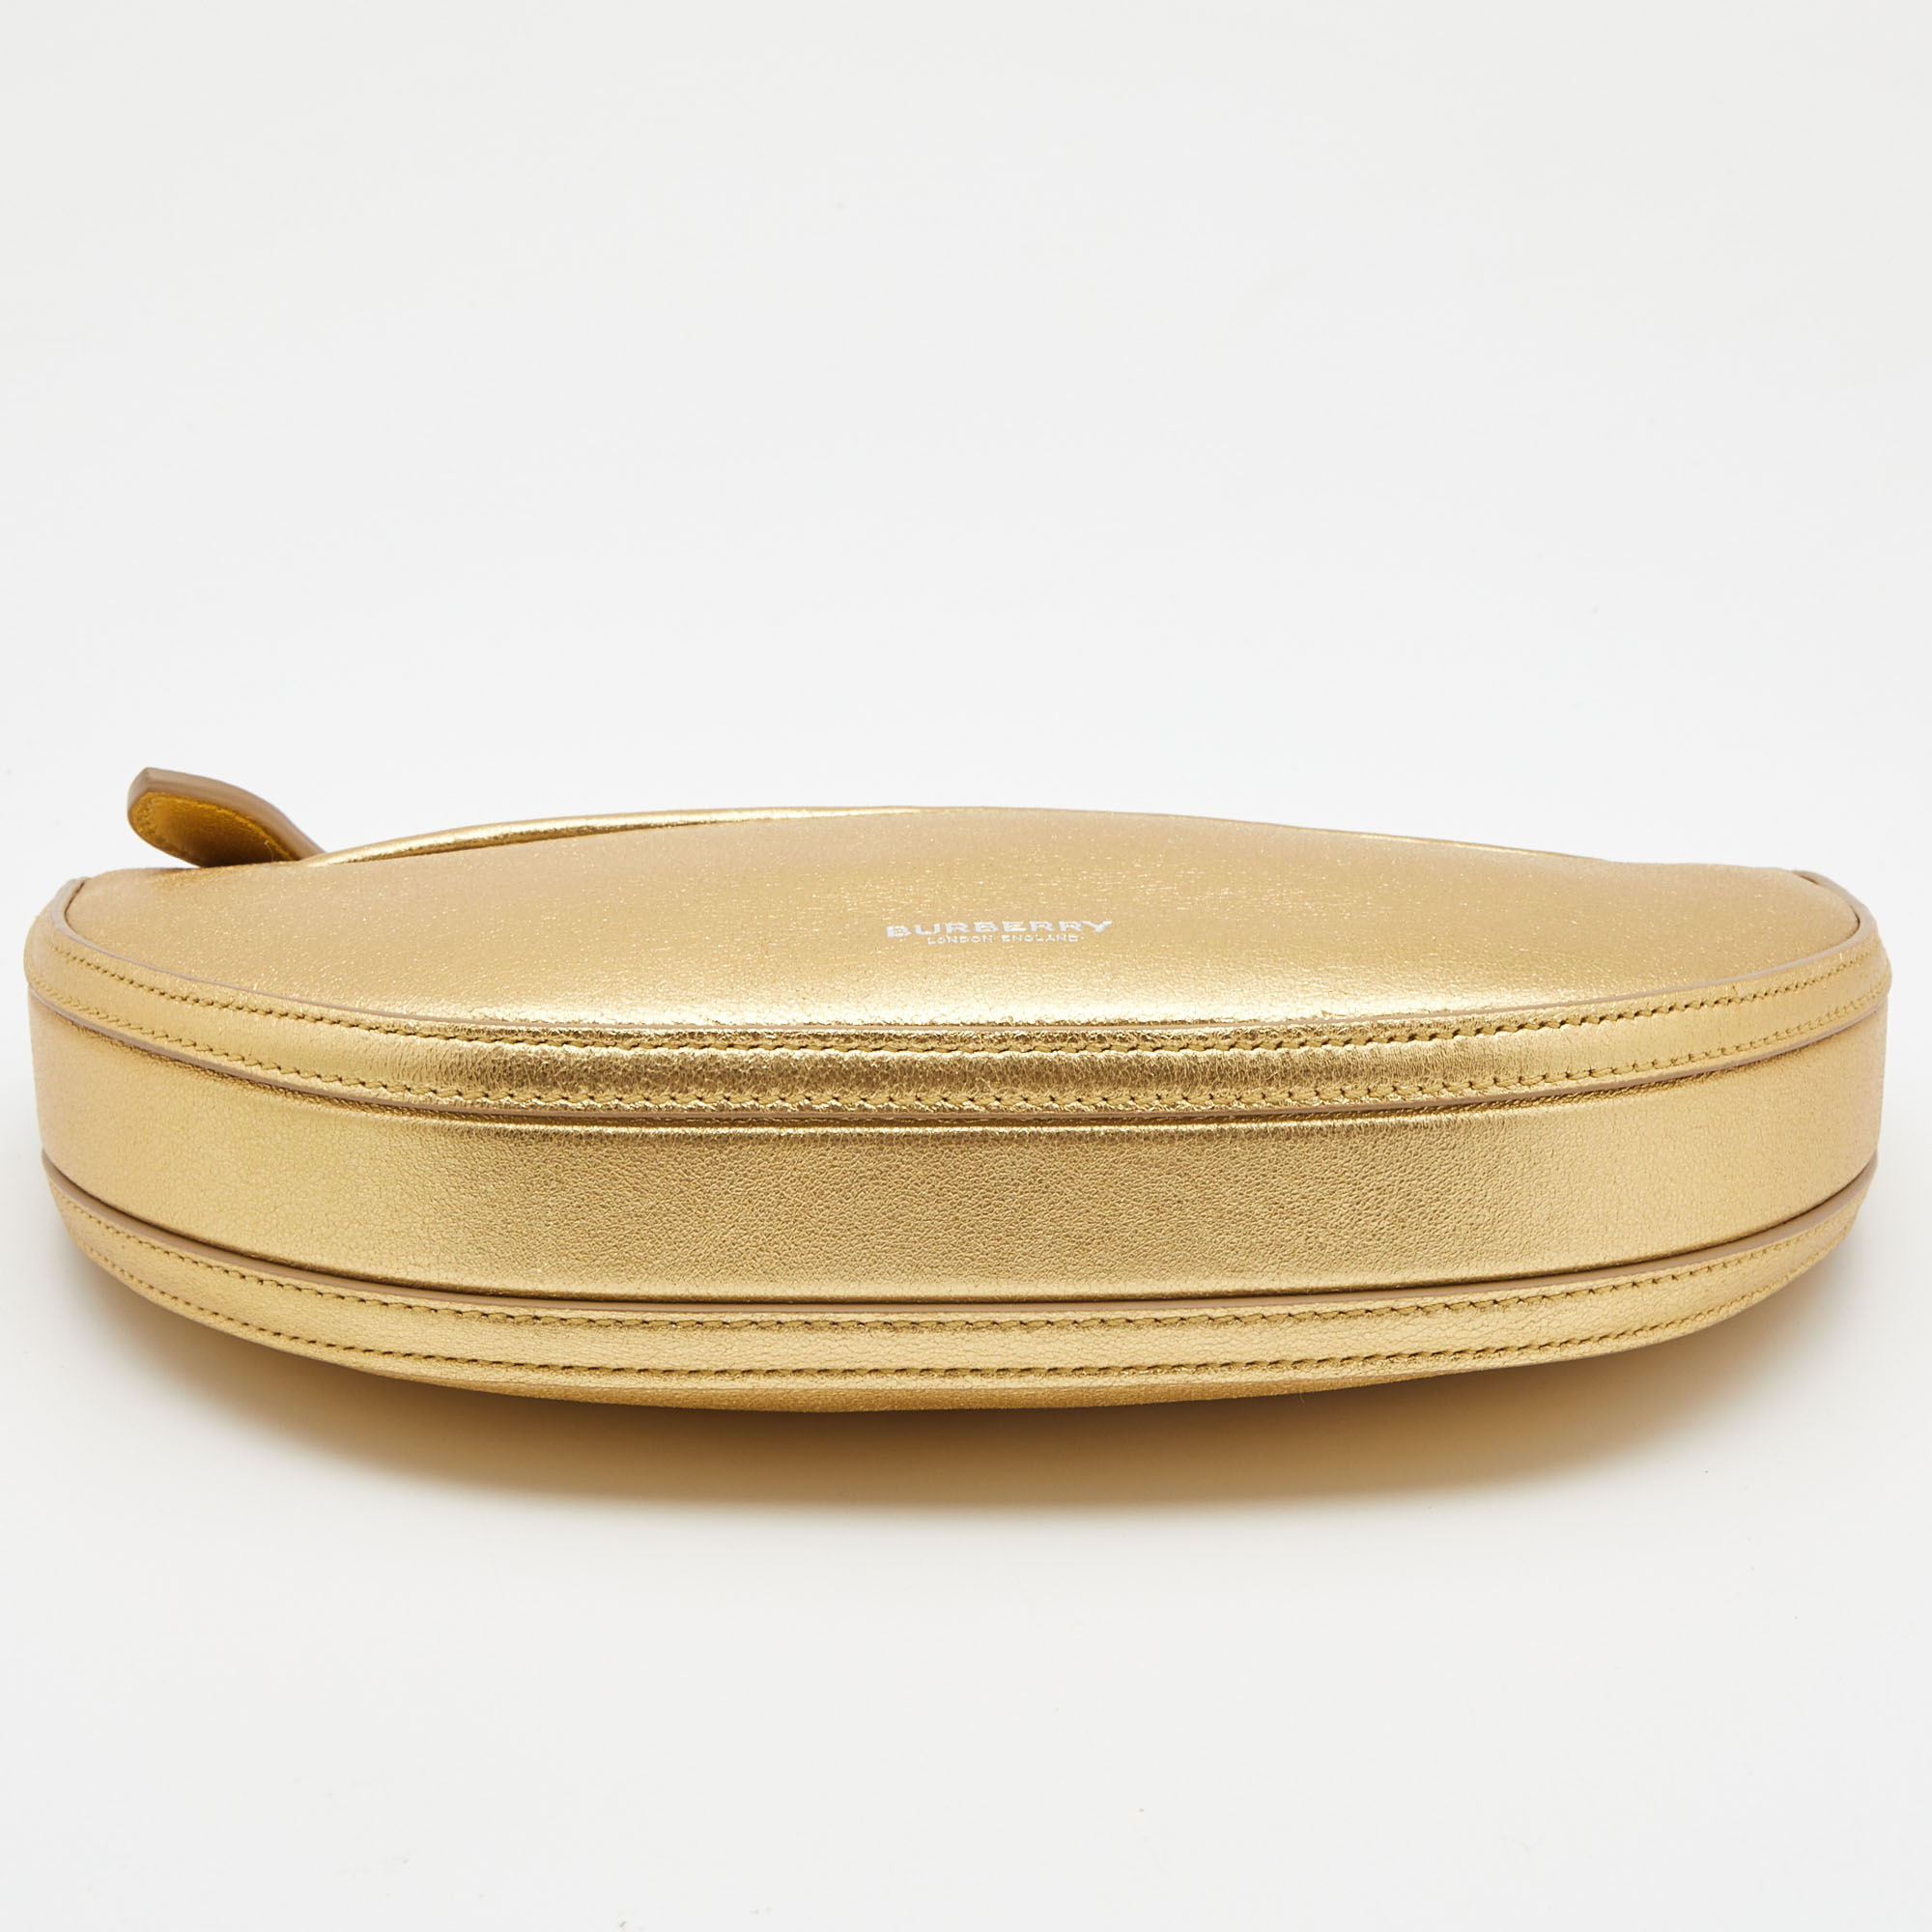 Burberry Gold Leather Mini Olympia Zip Chain Bag